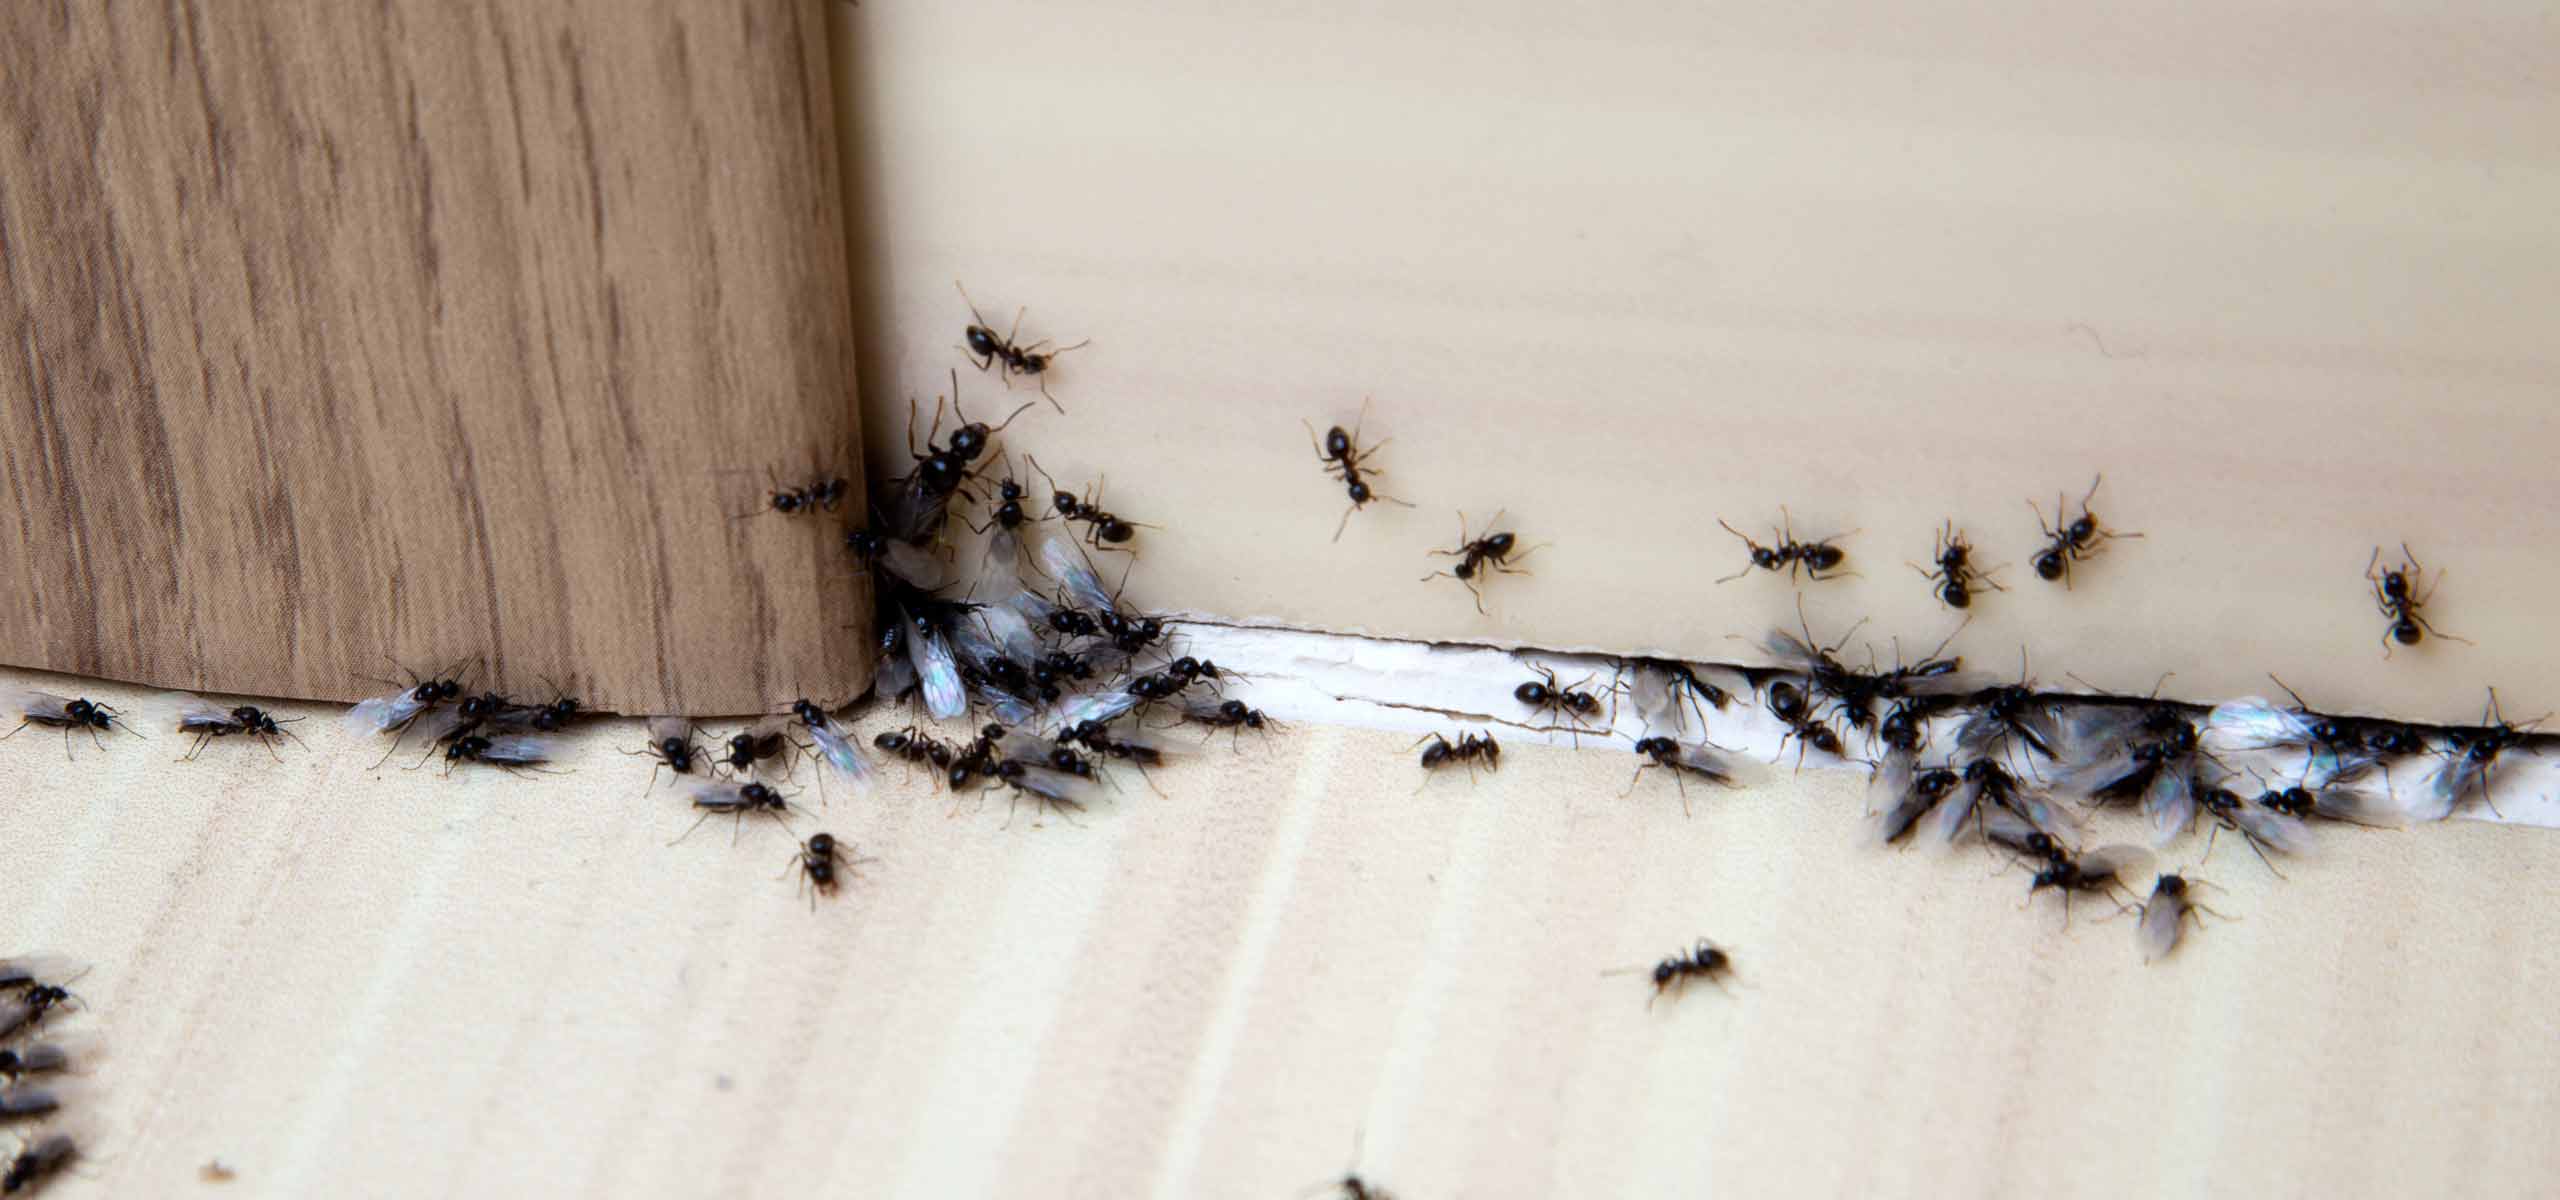 Why You Have Ants notwithstanding Your House Being Clean